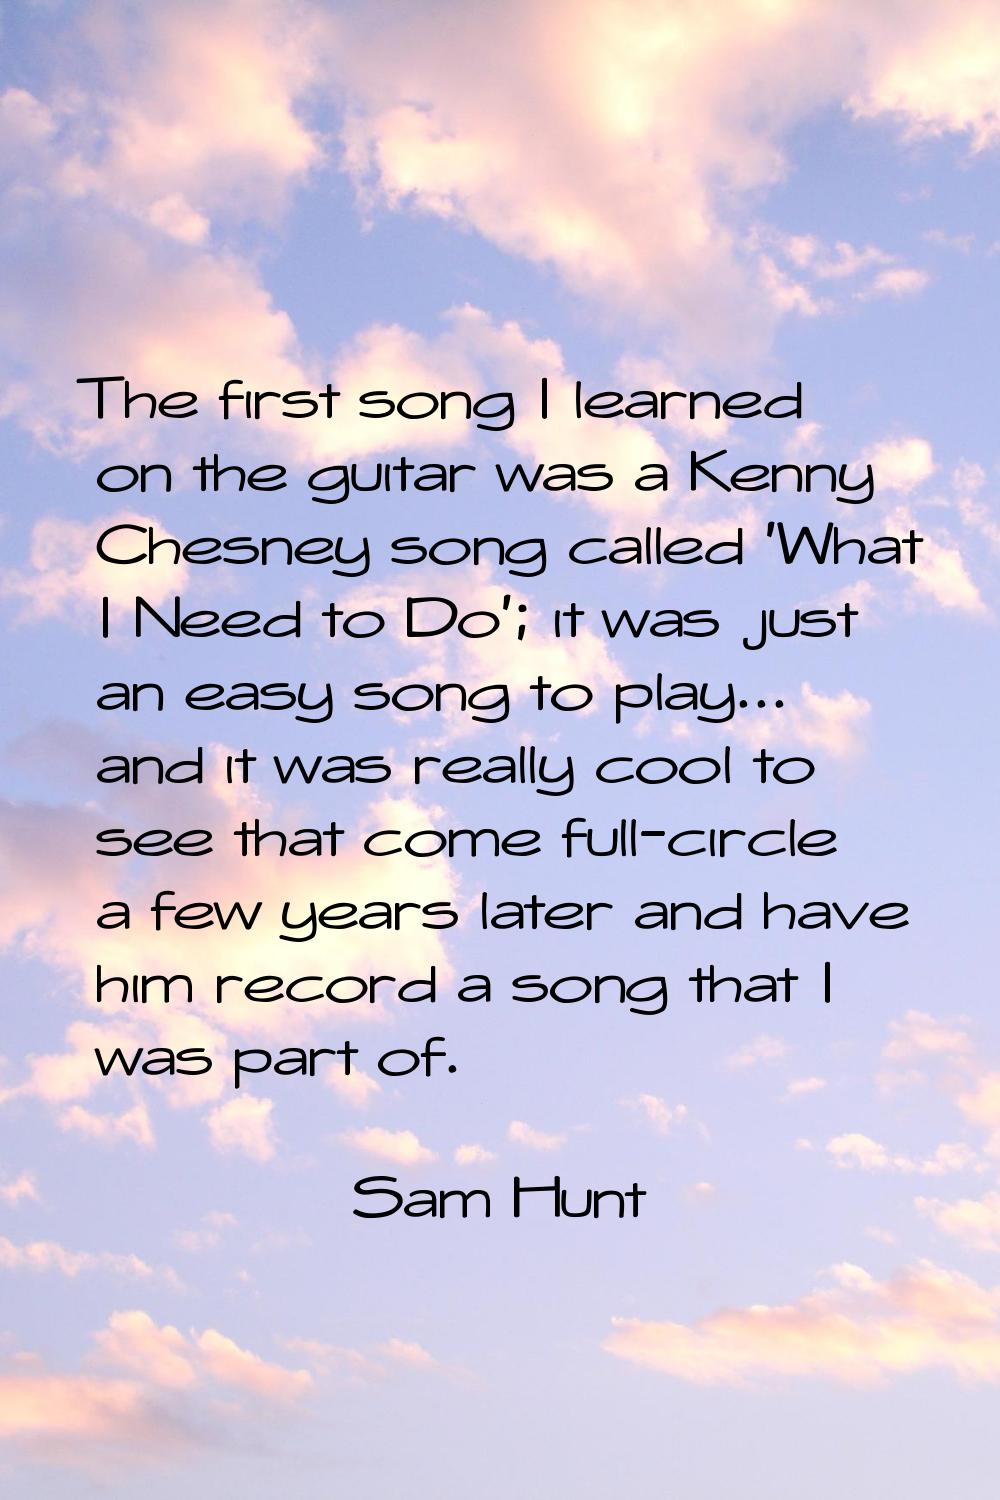 The first song I learned on the guitar was a Kenny Chesney song called 'What I Need to Do'; it was 